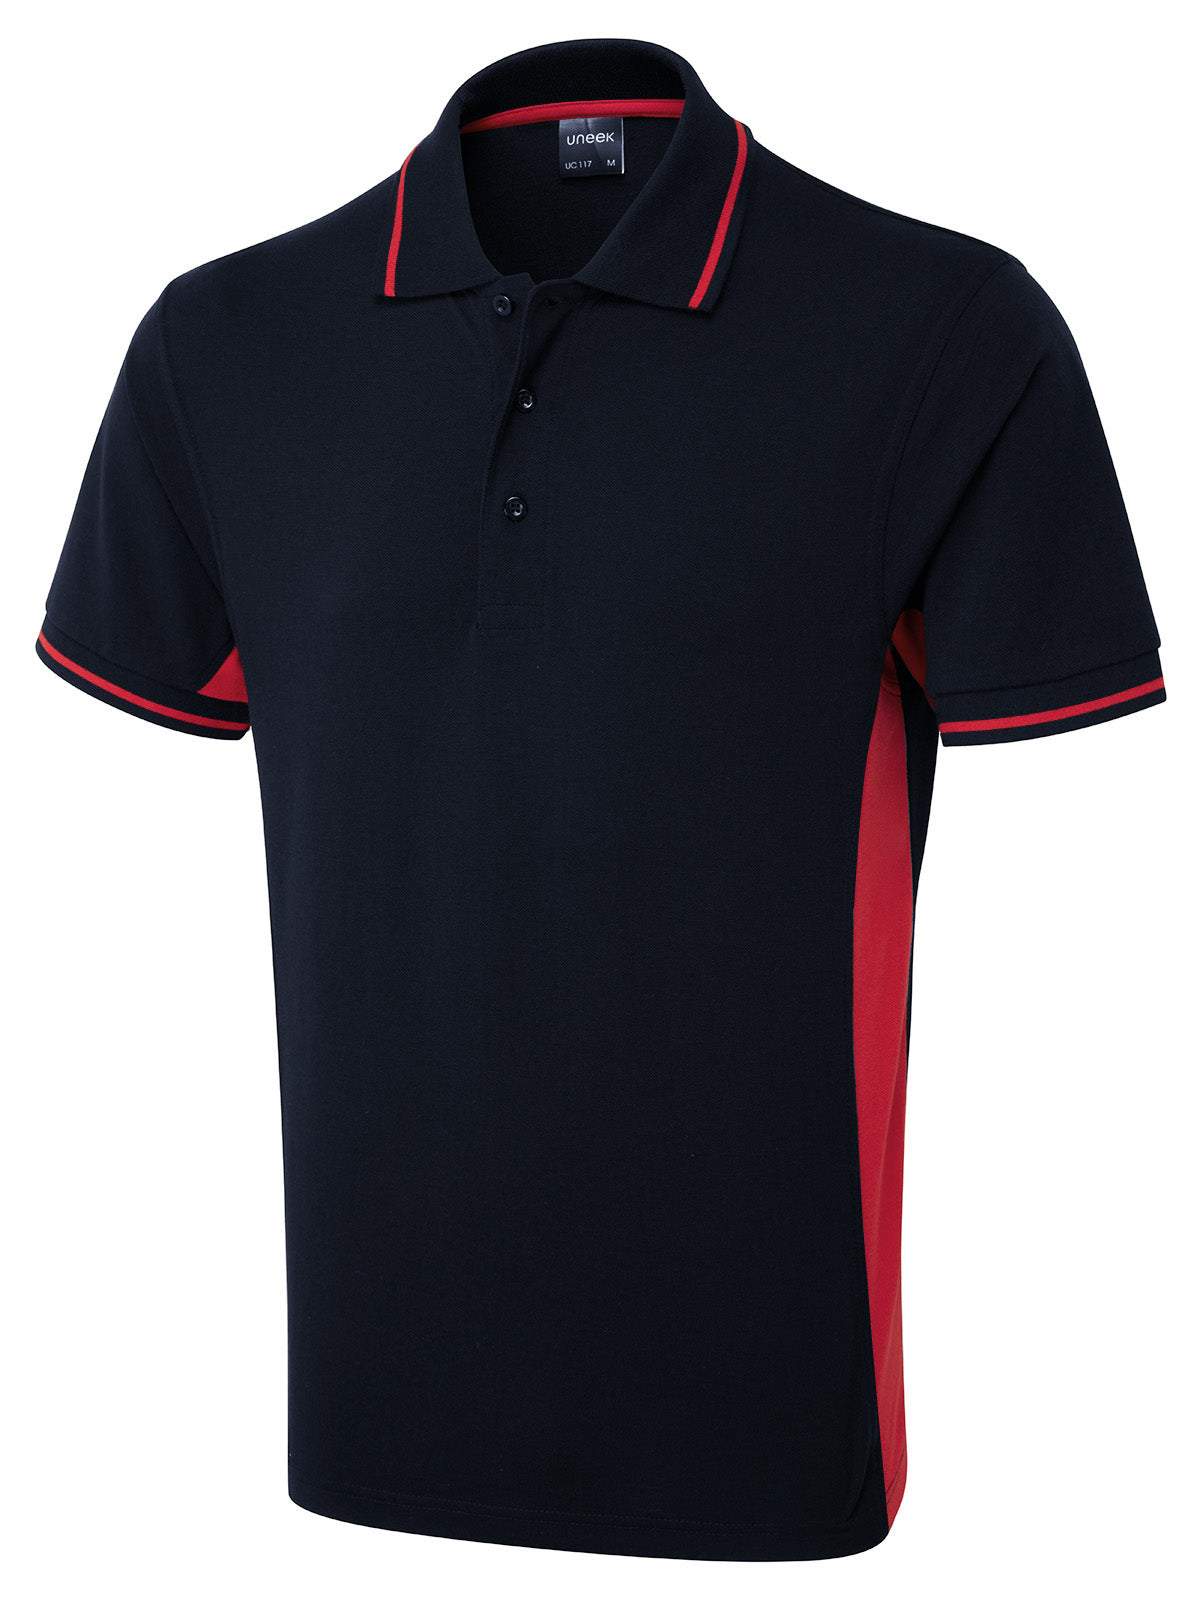 Uneek Two Tone Polo Shirt UC117 - Navy/Red